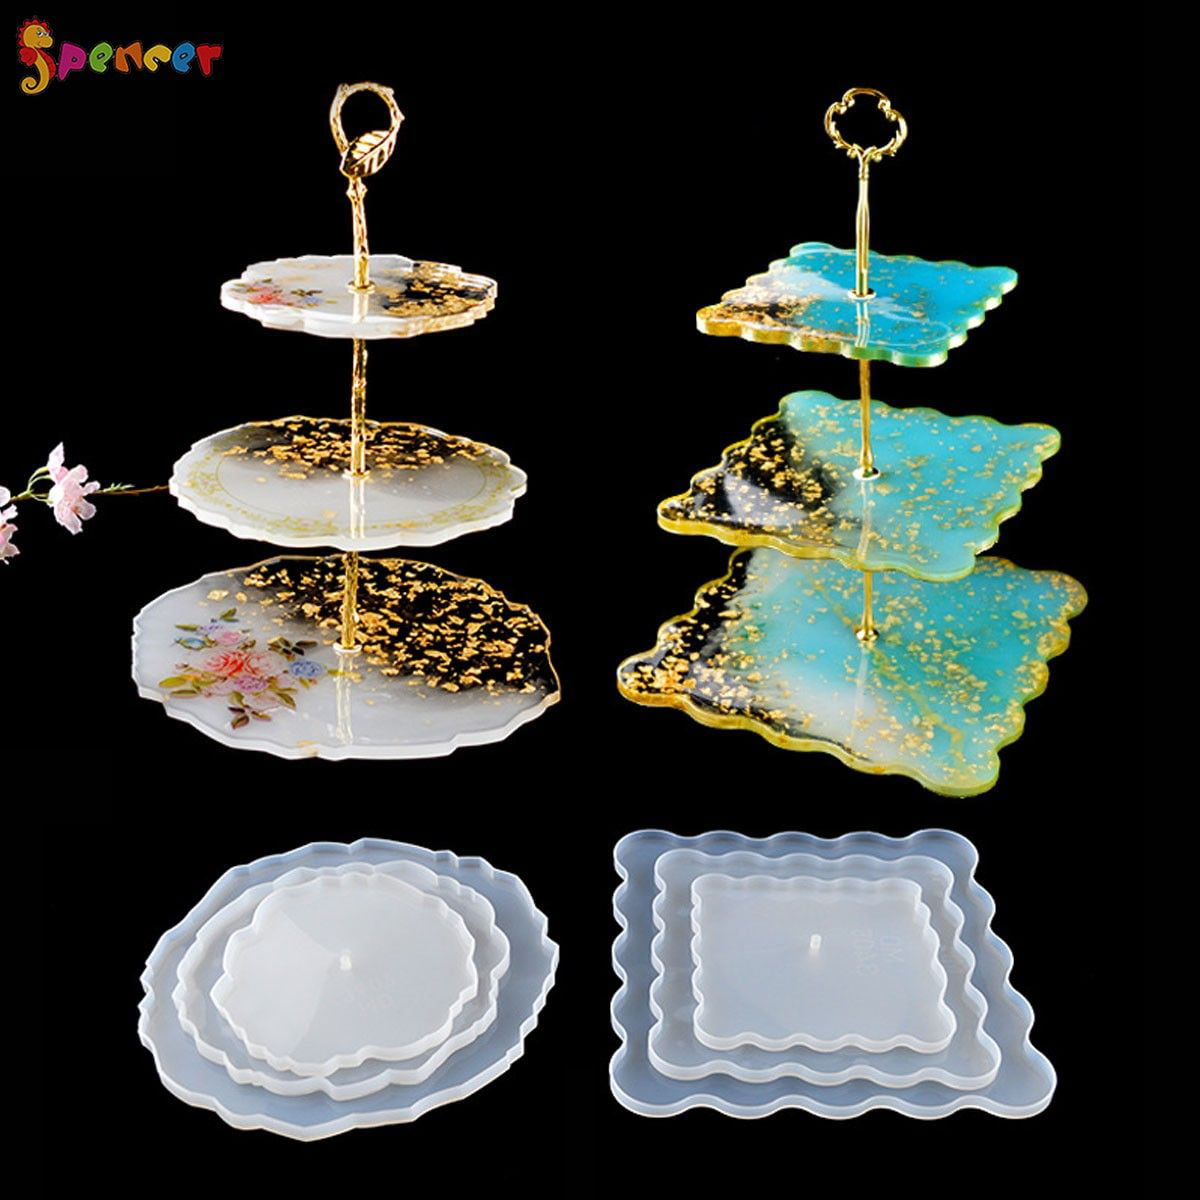 3 Layer Irregular Tray Resin Mold FHYT Cupcake Stand Resin Tray Molds with Gold Foils /&3 Tie Plate Stand Fitting Round Casting Silicone Mould for Making Dessert Platter Stand Home Party Decoration DIY